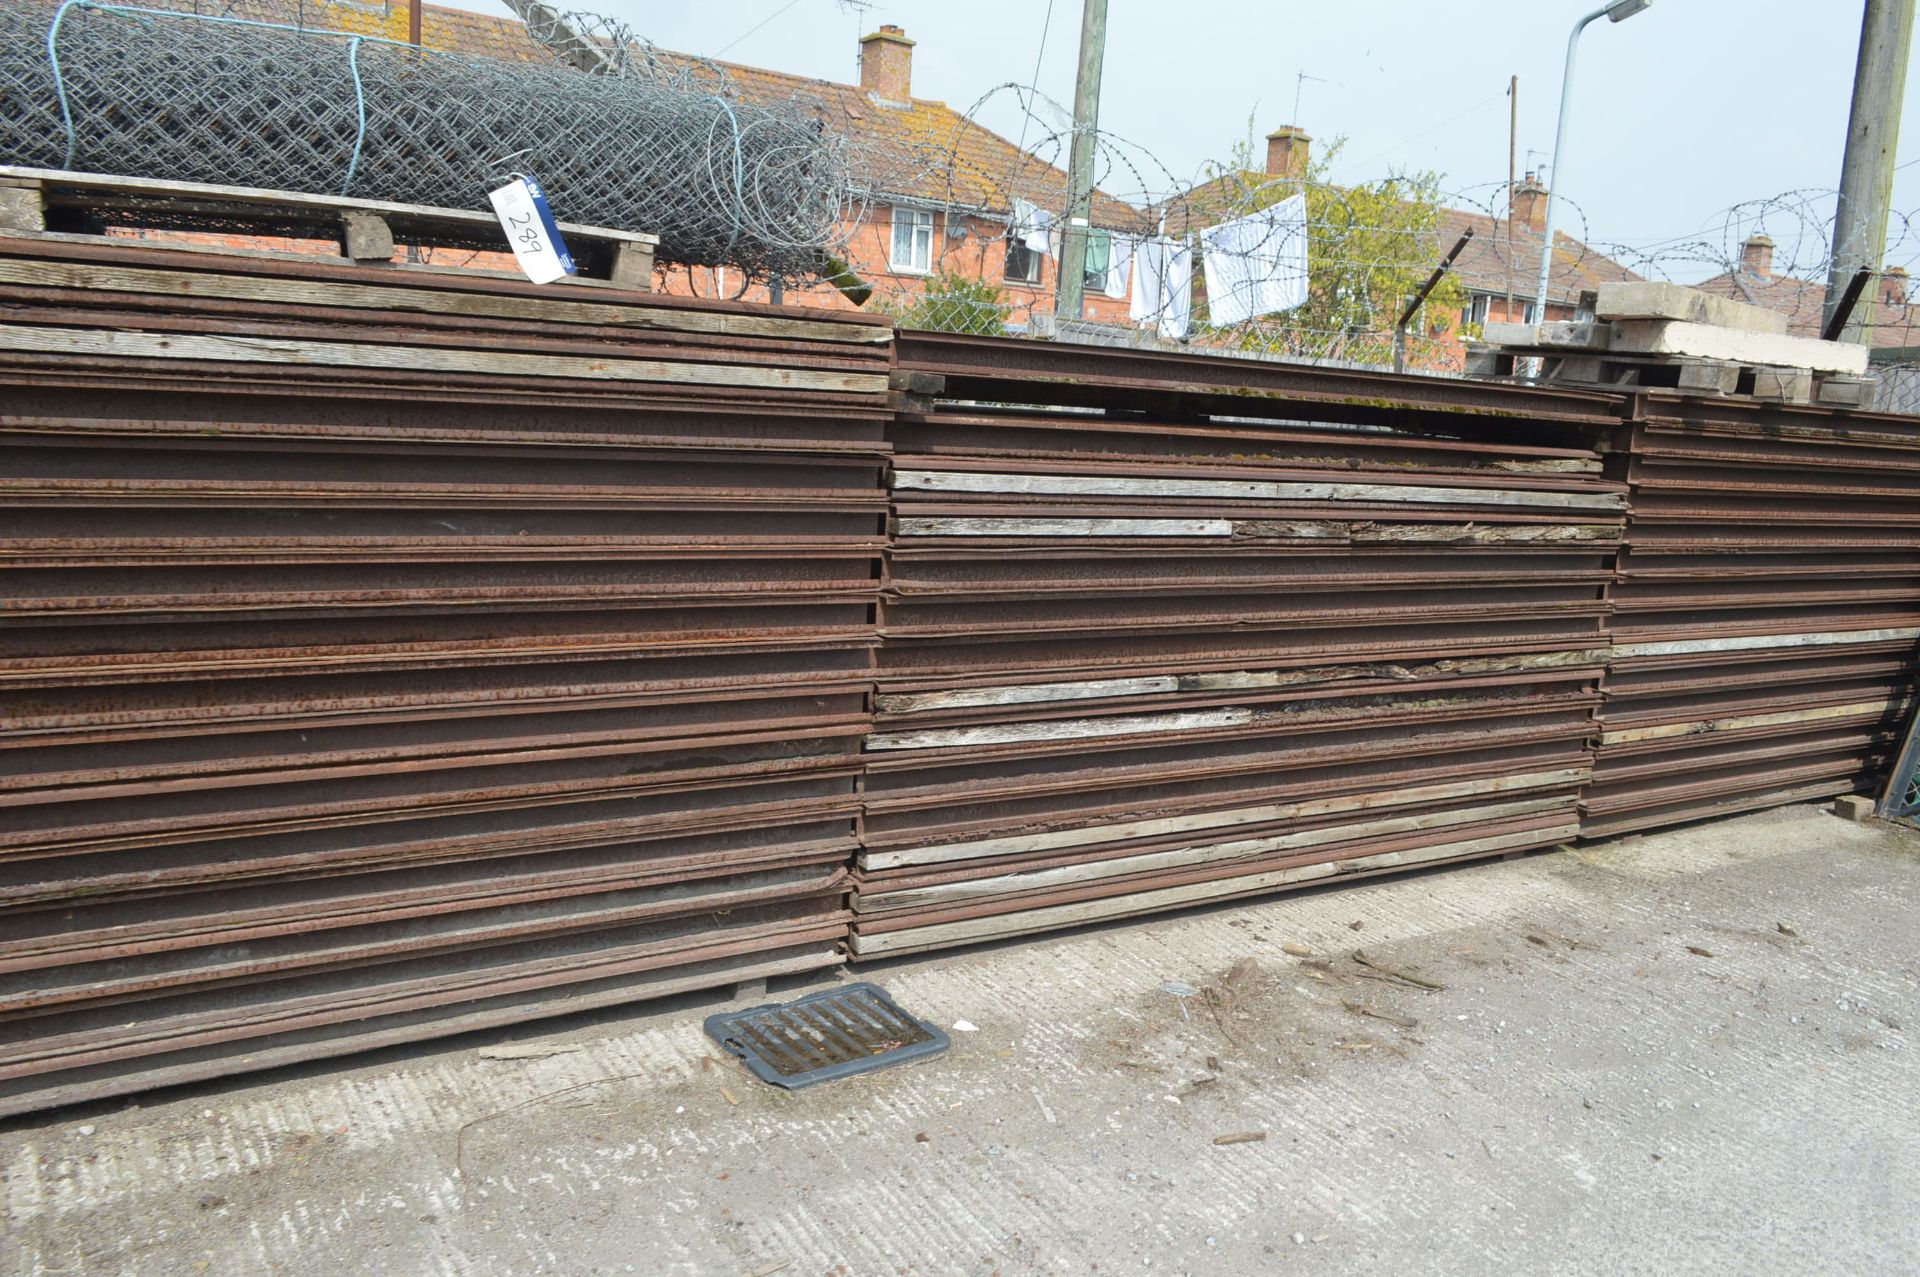 Approx. 213 TWIN WALL STEEL BIN PANELS, mainly 2.27m/ 2.88m x 1.2m x 95mm - Image 5 of 7